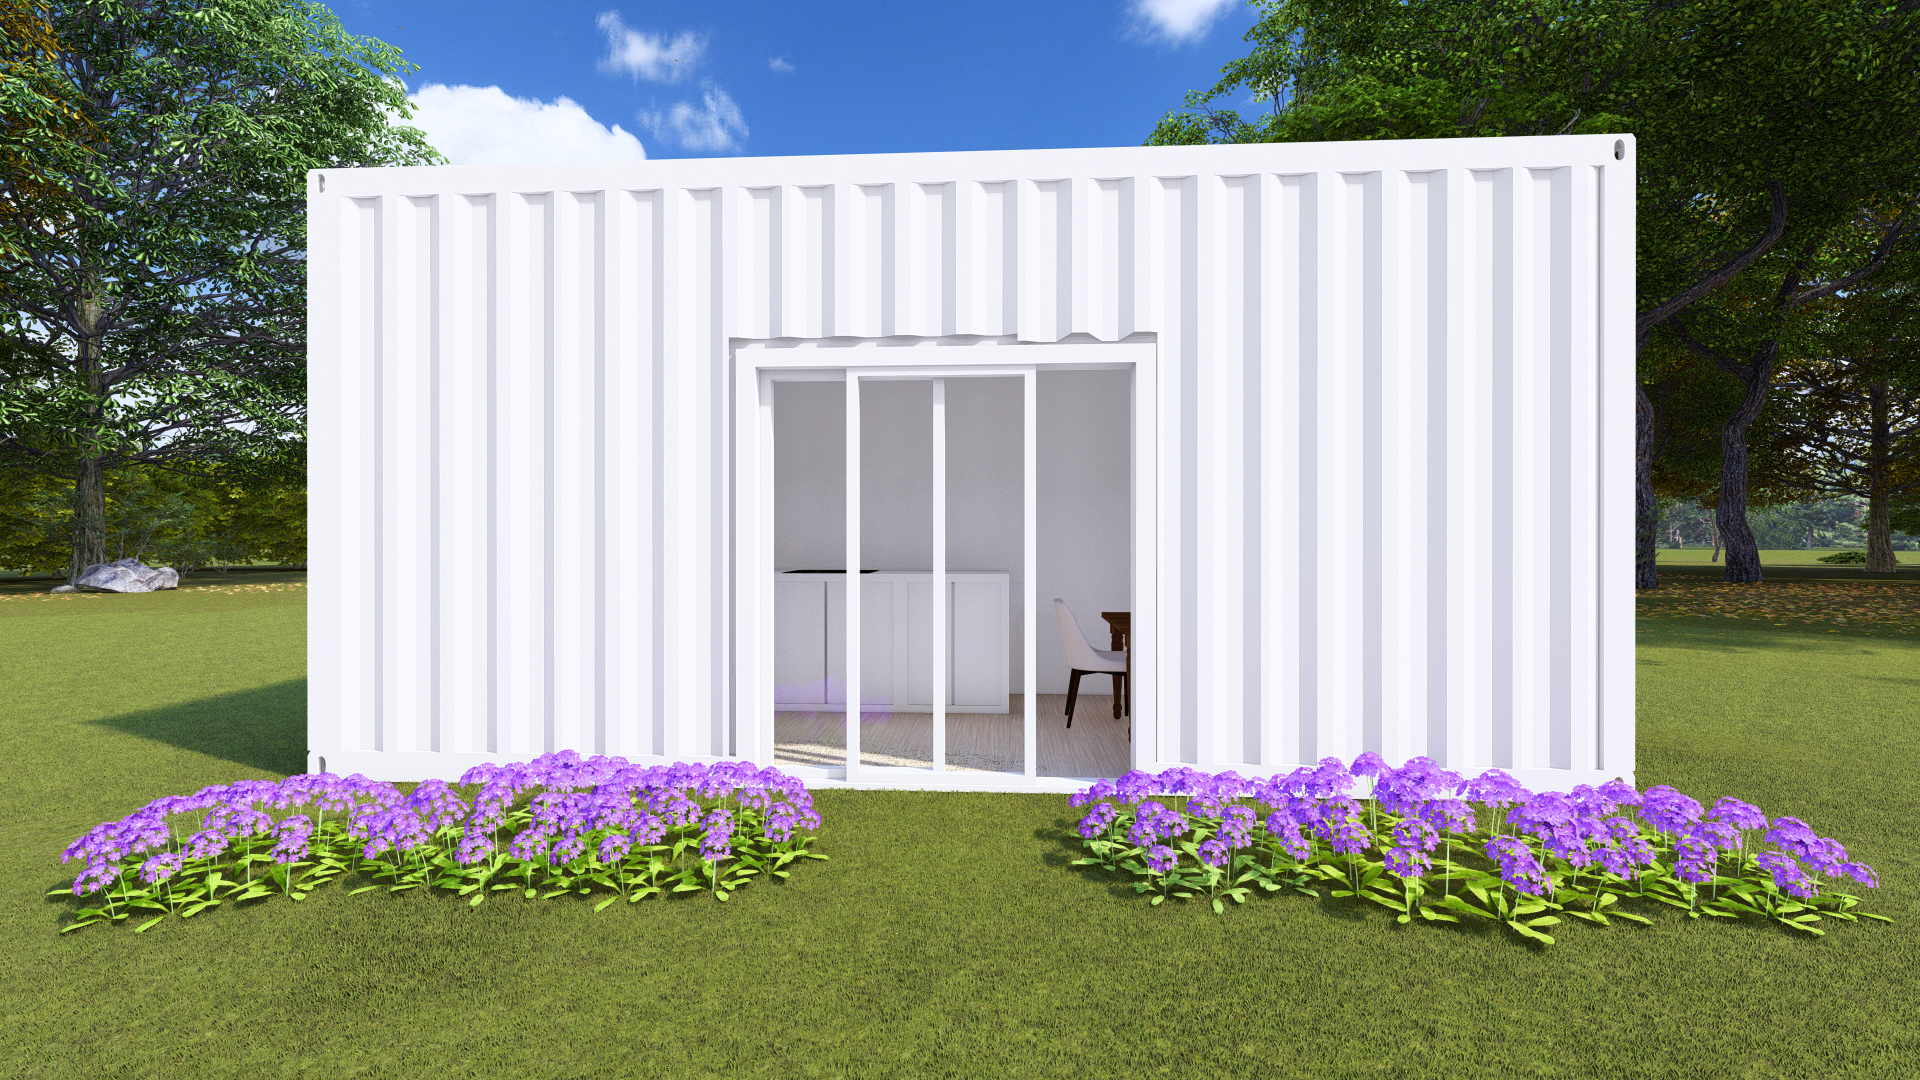 20x8 Shipping Container Kitchen & Dining Area Blueprints